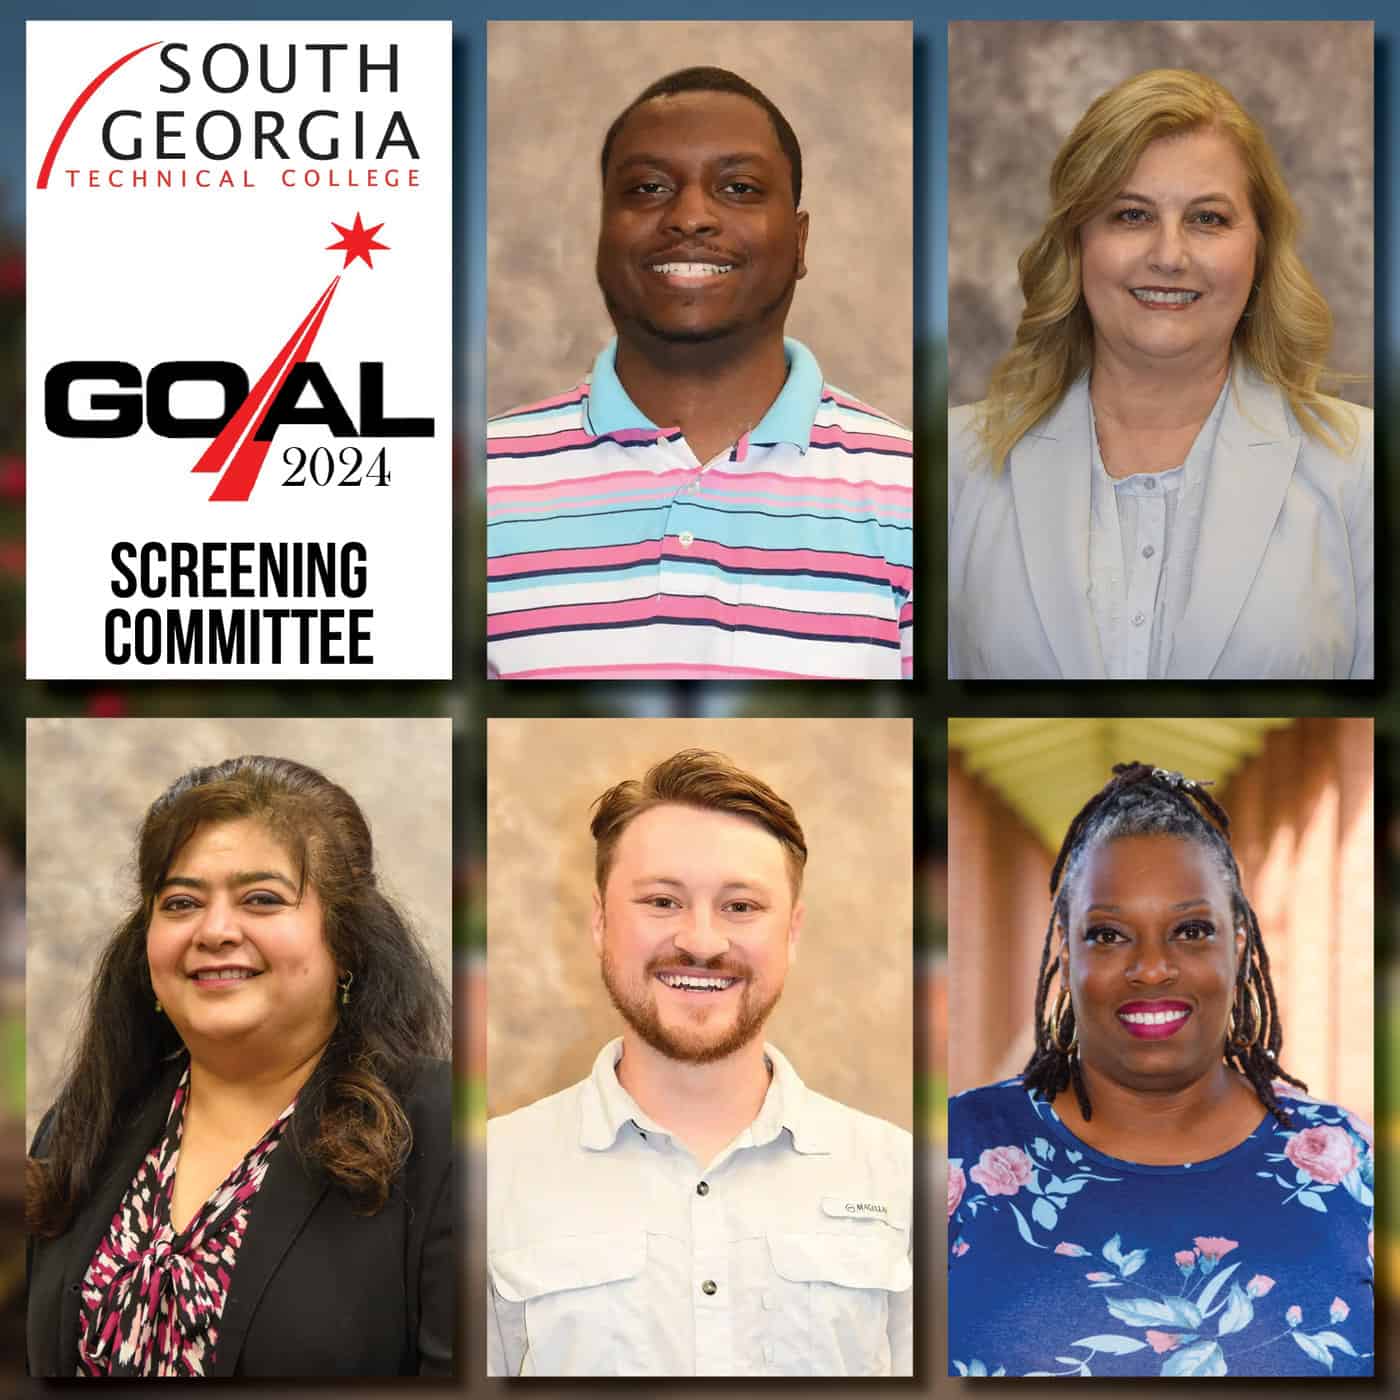 Pictured are members of the SGTC GOAL 2024 screening committee (top, l-r) Peiare Adderley, Michelle McGowan, (bottom, l-r) Sandhya Muljibhai, Tylen Pepito, and Jennifer Robinson.